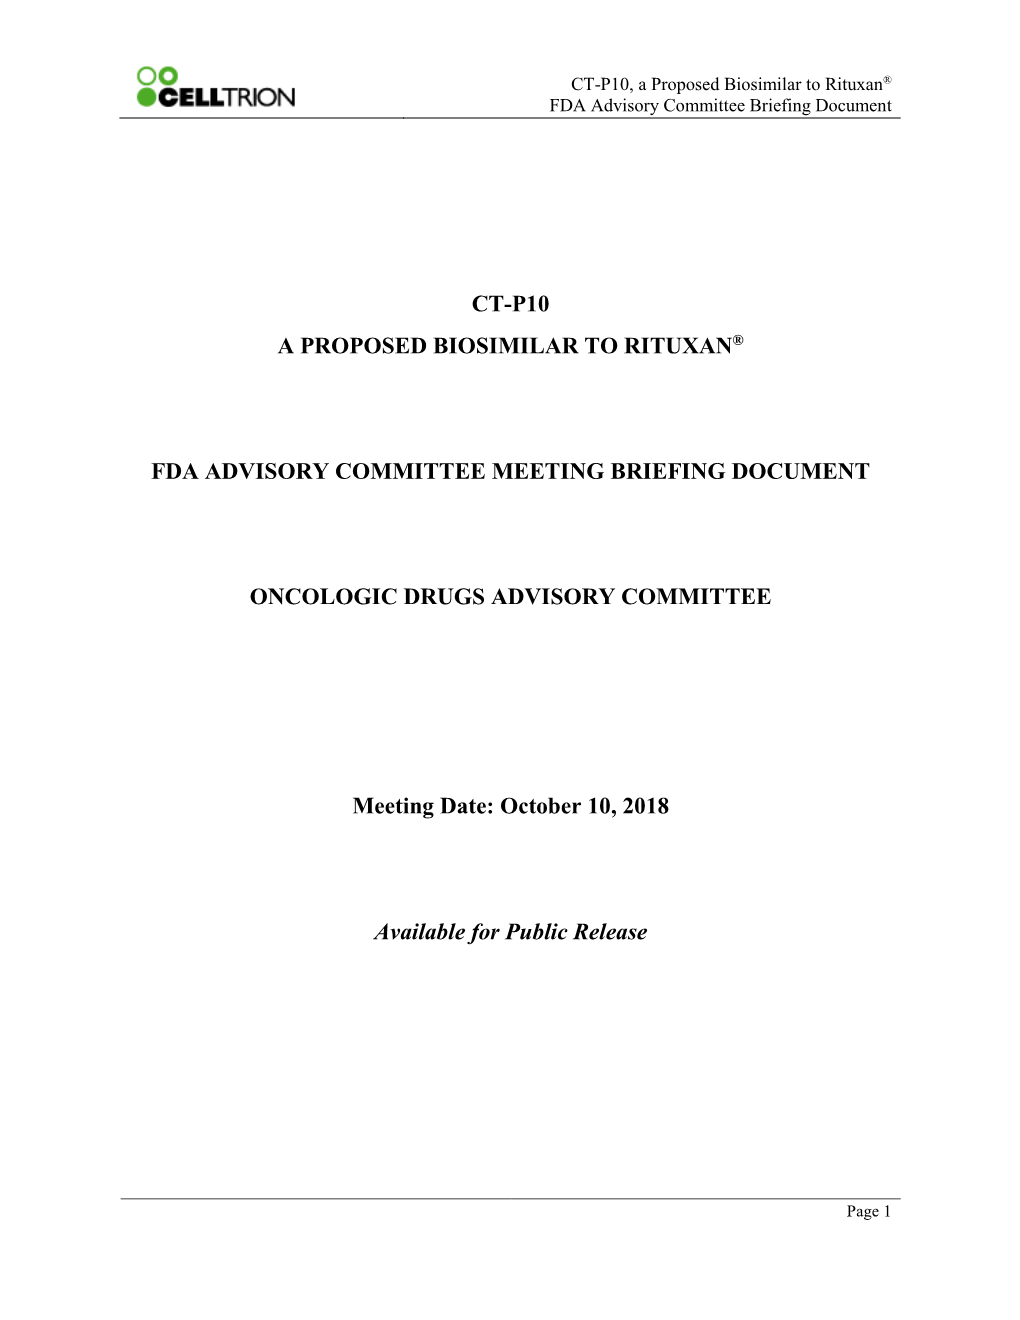 CT-P10, a Proposed Biosimilar to Rituxan® FDA Advisory Committee Briefing Document